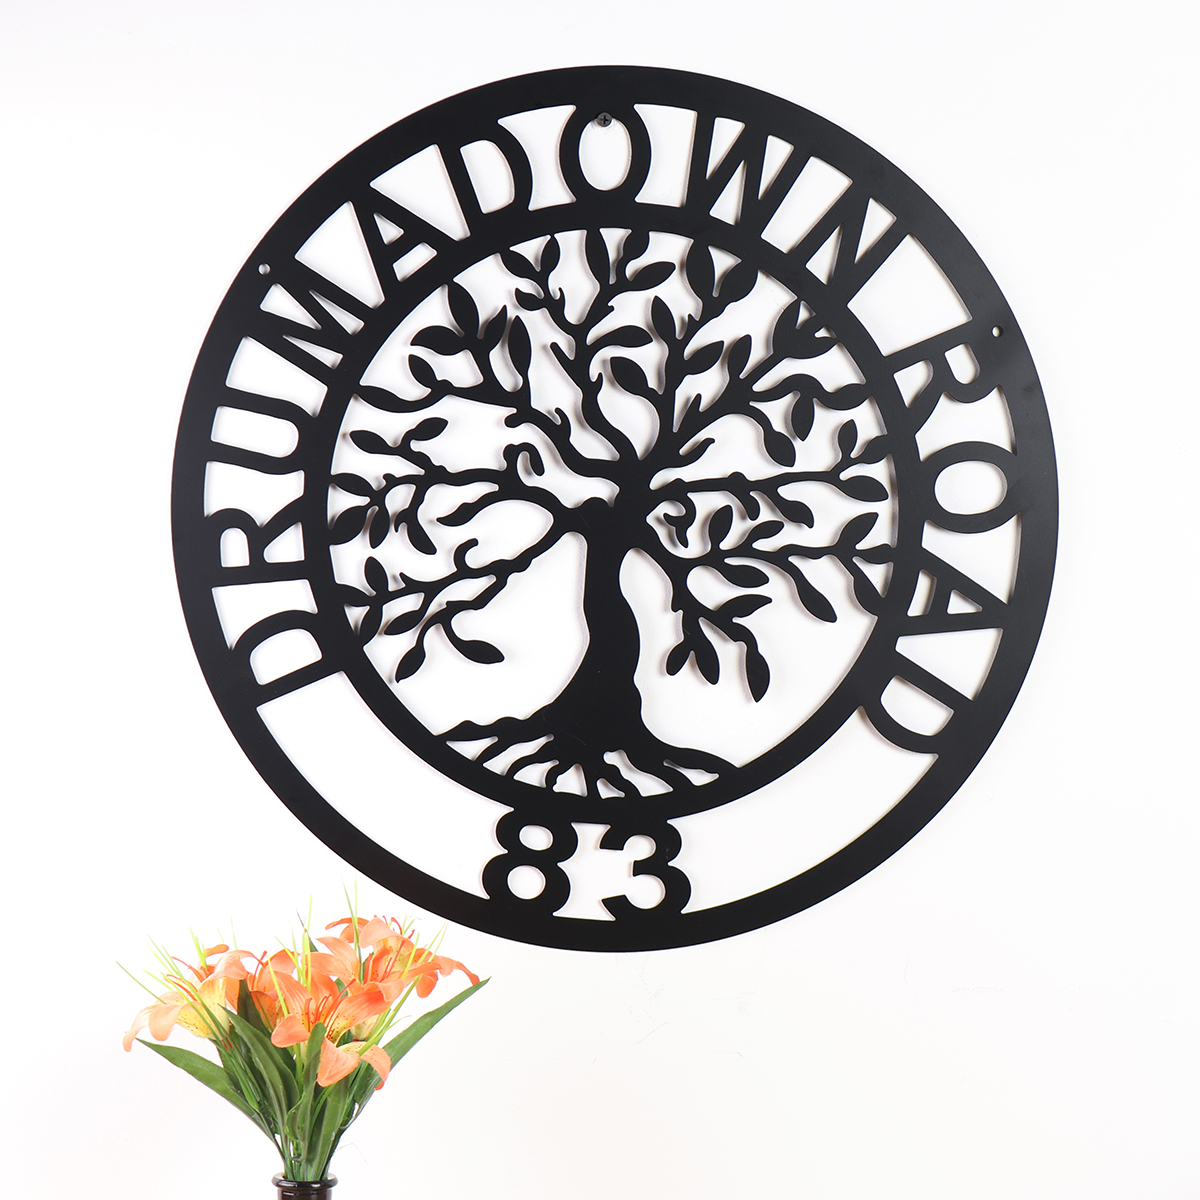 Metal-Round-Tree-of-Life-Wall-Art-Peronsalised-Wall-Decorations-for-Home-Office-Living-Room-Fashion--1764917-9